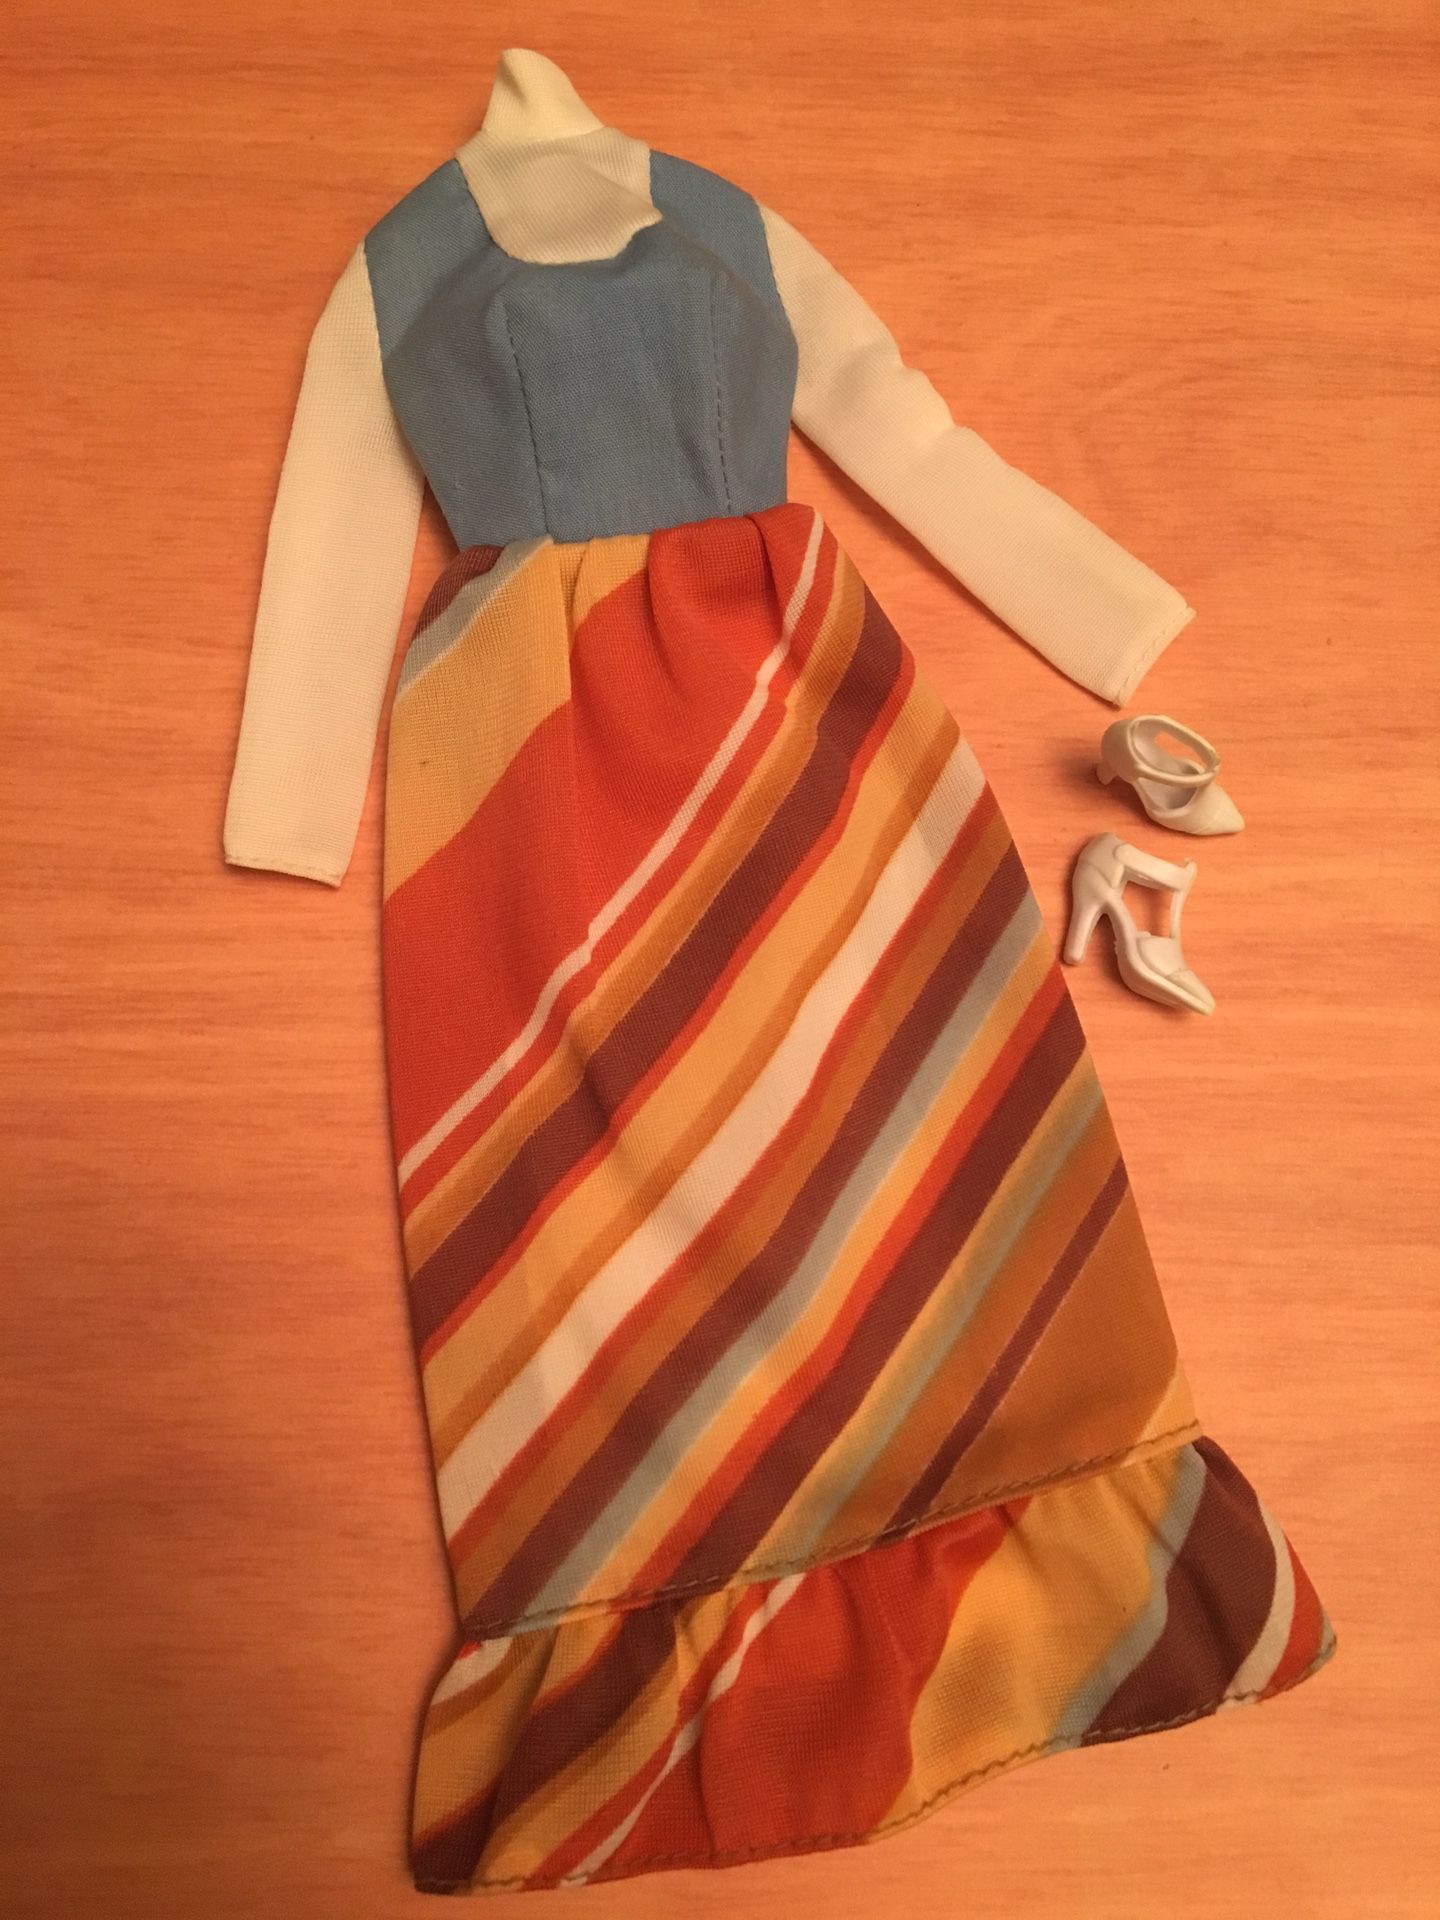 Vintage Barbie Best Buy 9622 Brown Striped dress with Blue White top